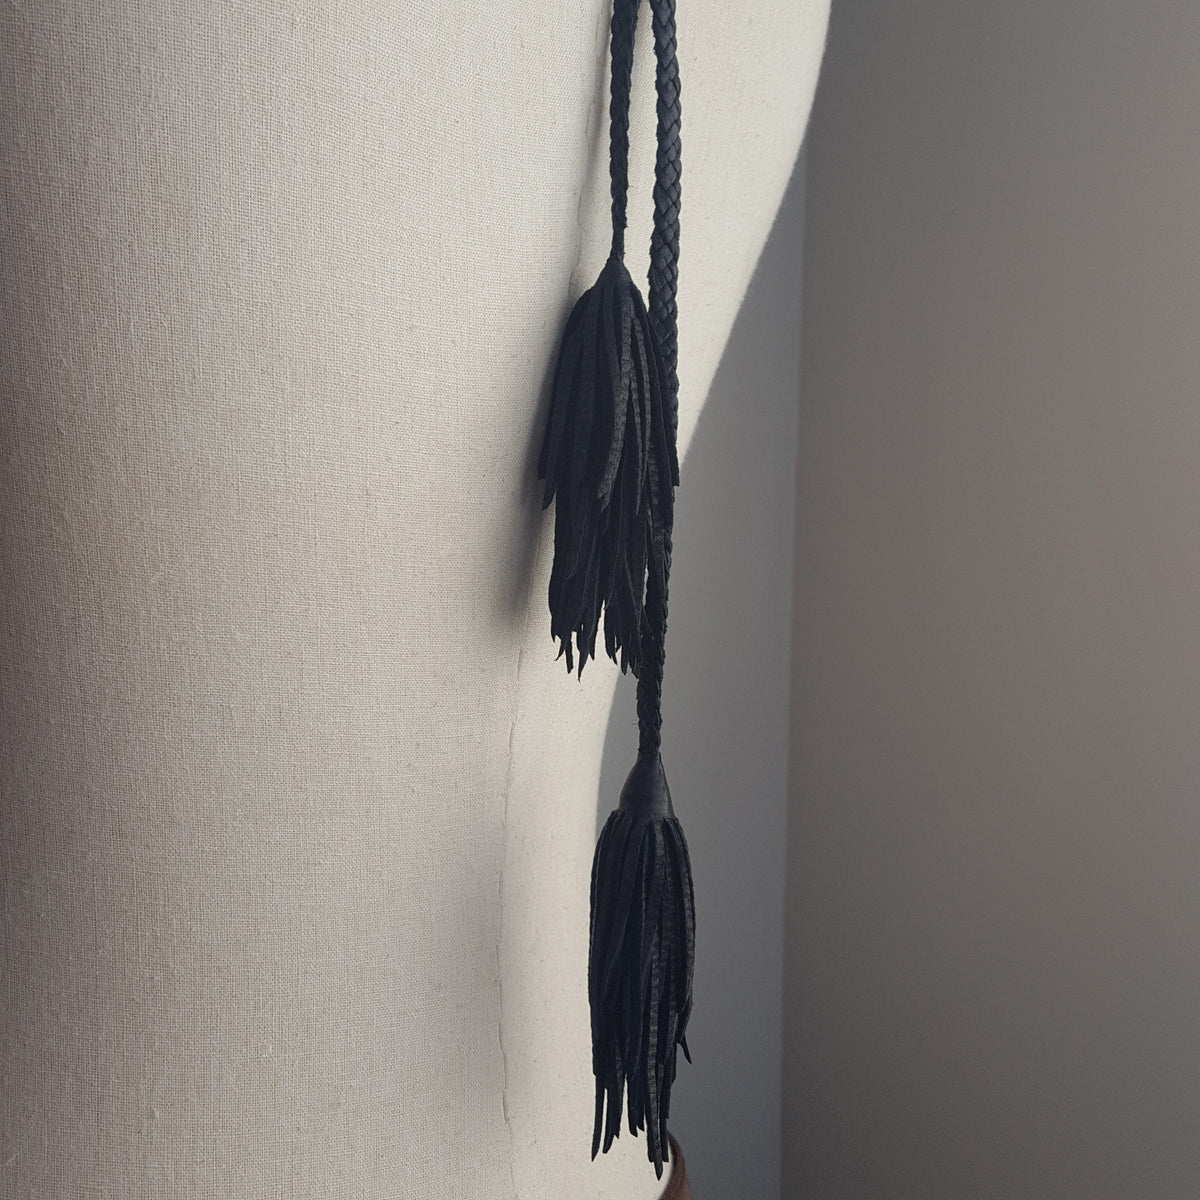 black tassels on the eternity braided leather choker necklace